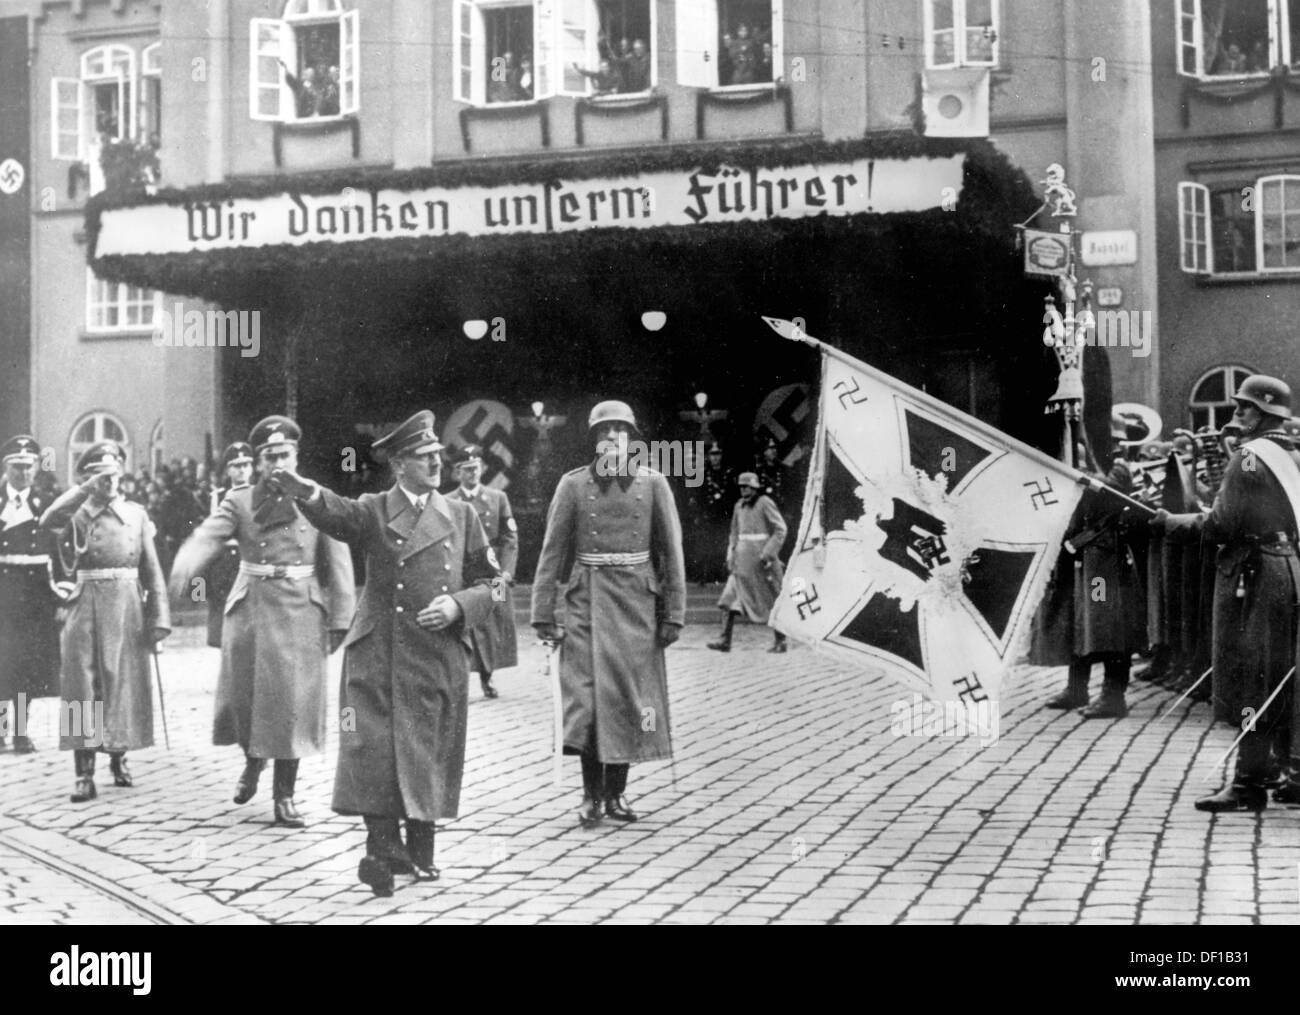 The image from the Nazi Propaganda! shows Adolf Hitler during his welcome ceremony in the Sudetenland after the Munich Agreement of 29 September 1938. 'We thank our Führer', reads the slogan. Daten and place unknown. Fotoarchiv für Zeitgeschichte Stock Photo